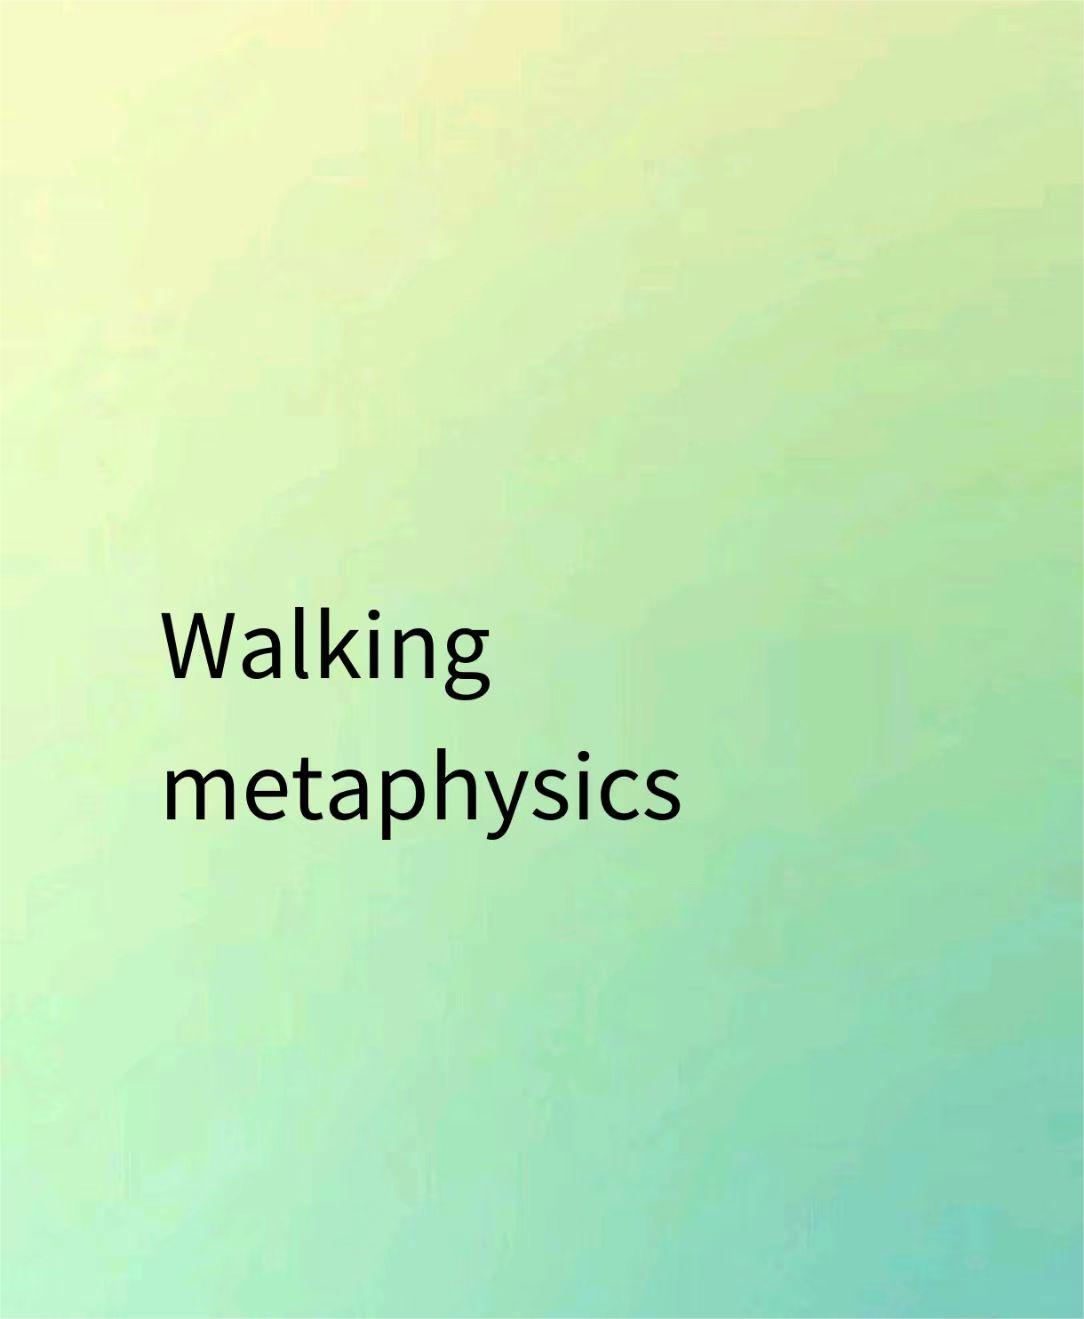 A Metaphysics about Walking